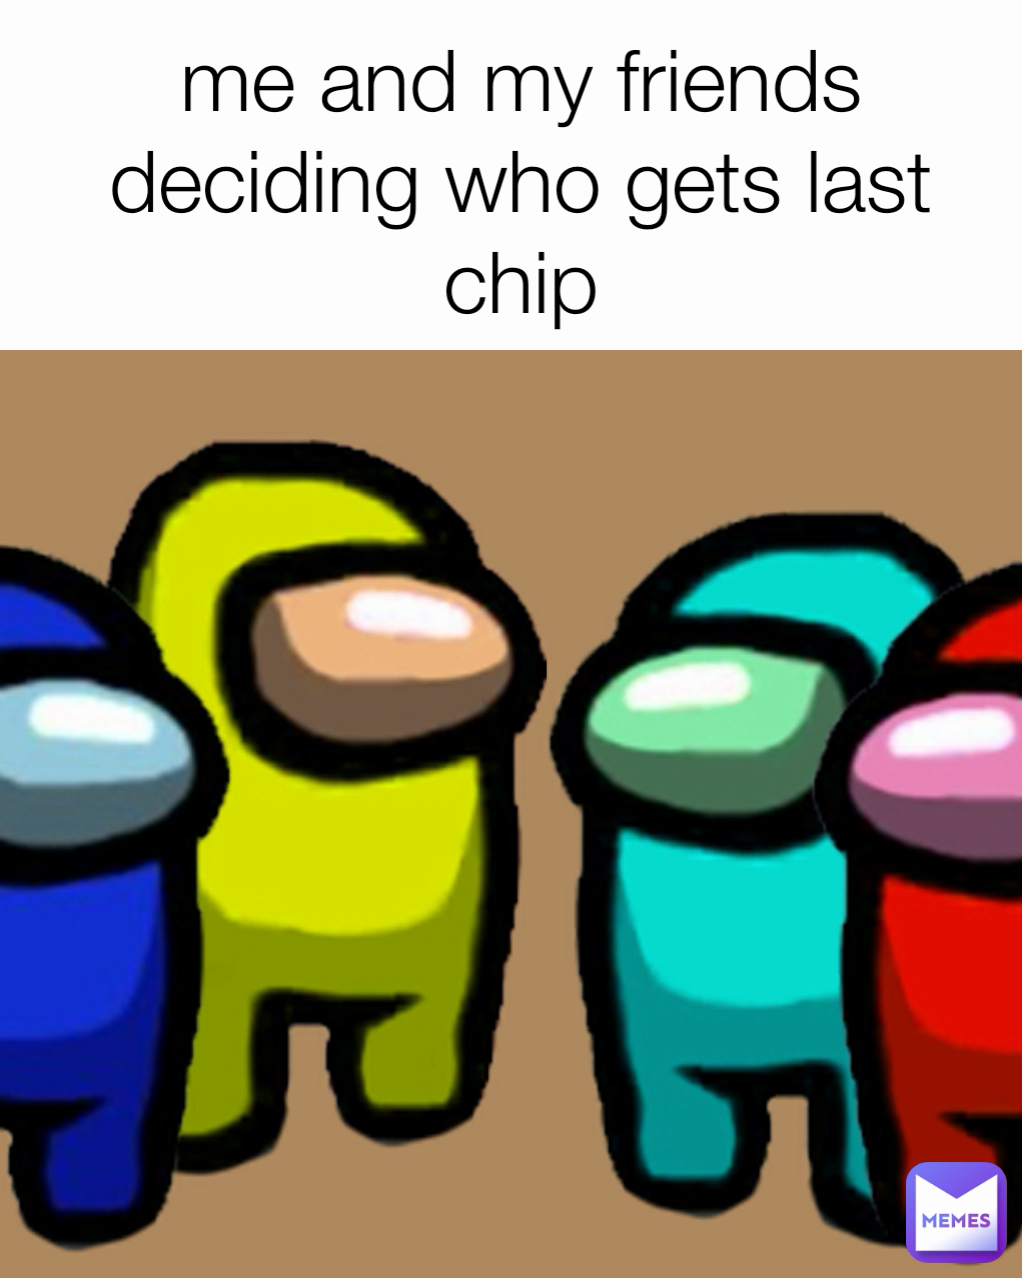 me and my friends deciding who gets last chip